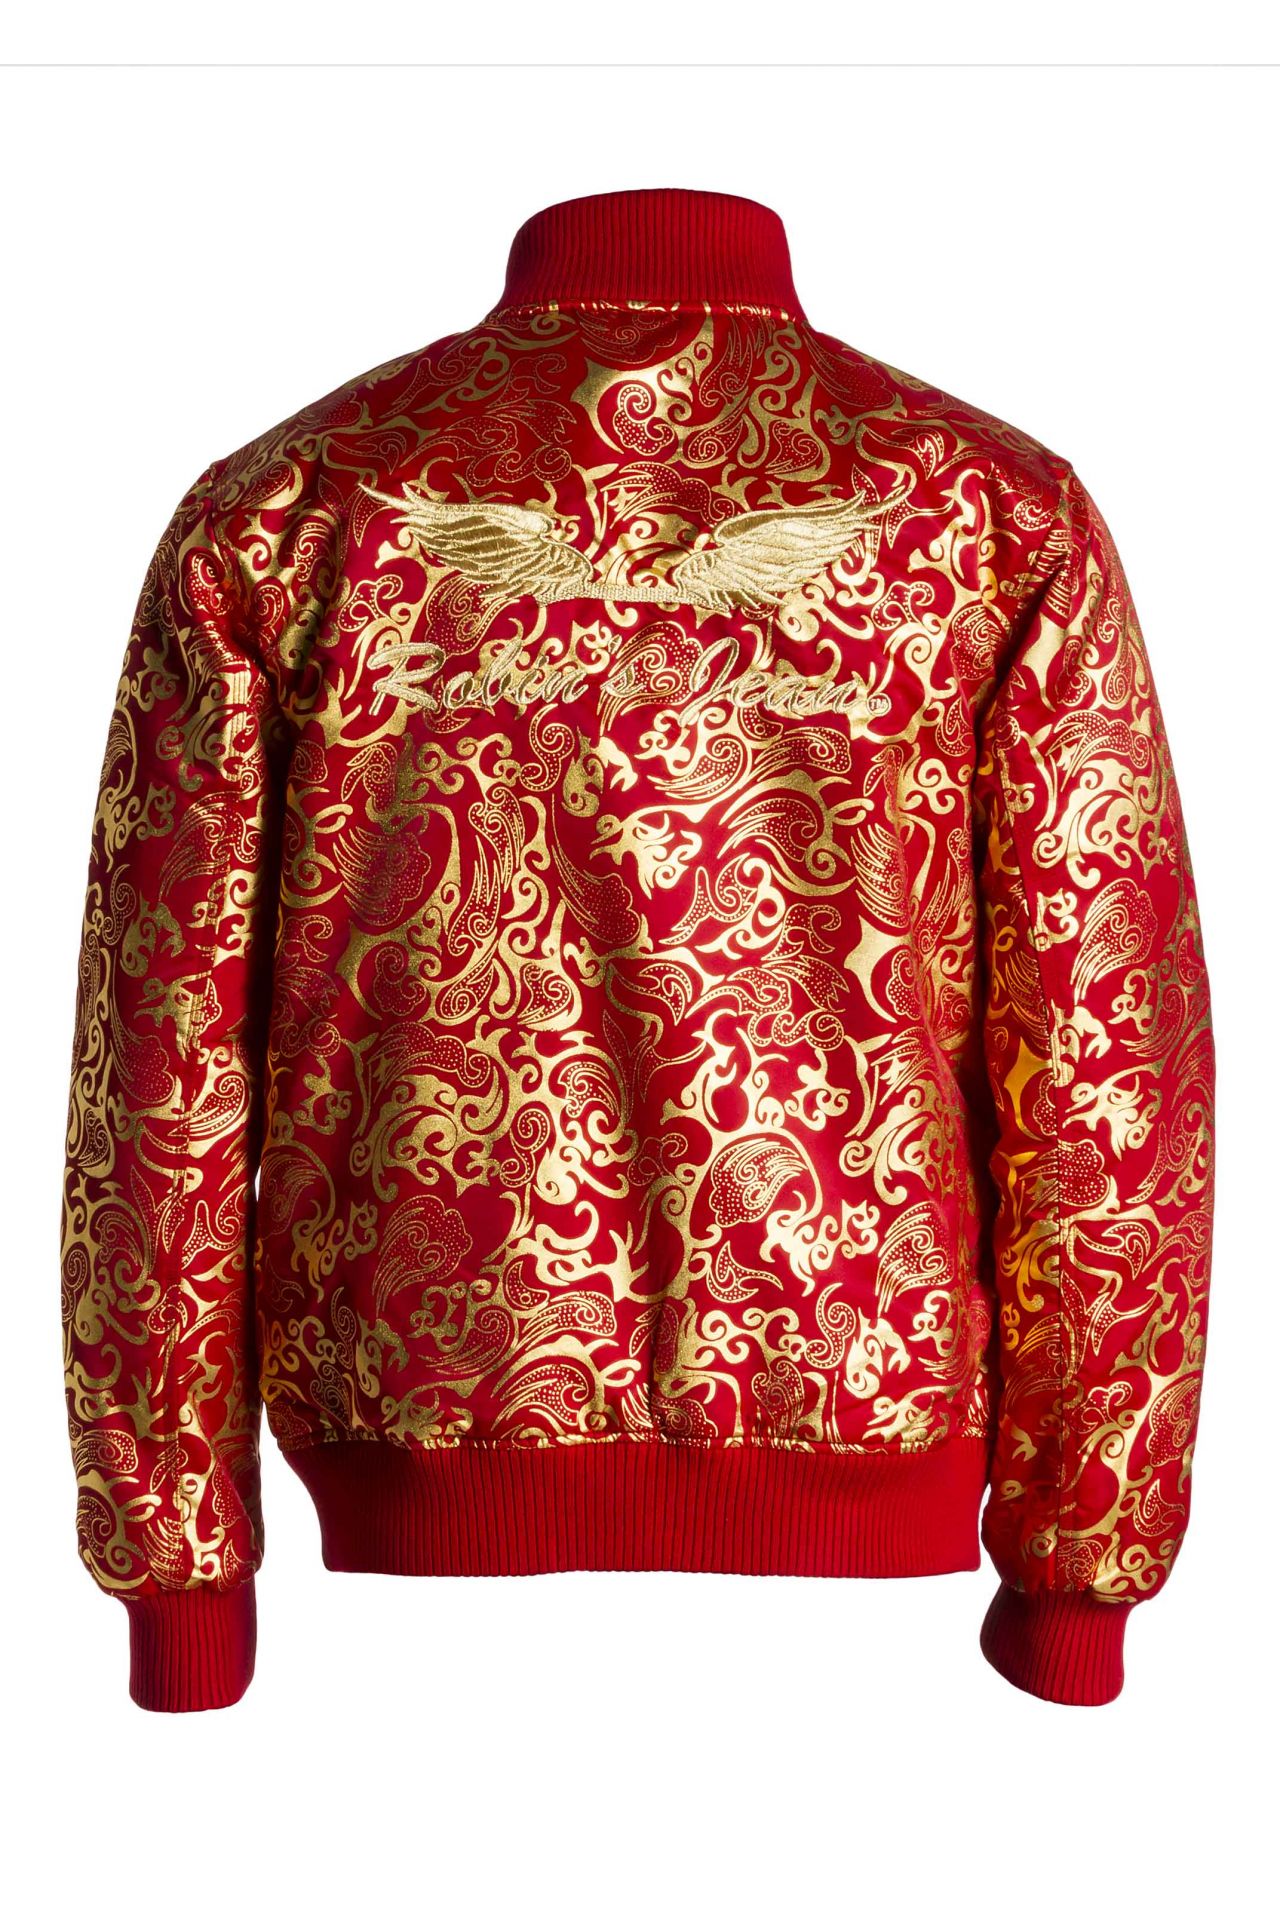 CLOUDS REVERSIBLE BOMBER JACKET IN RED AND GOLD